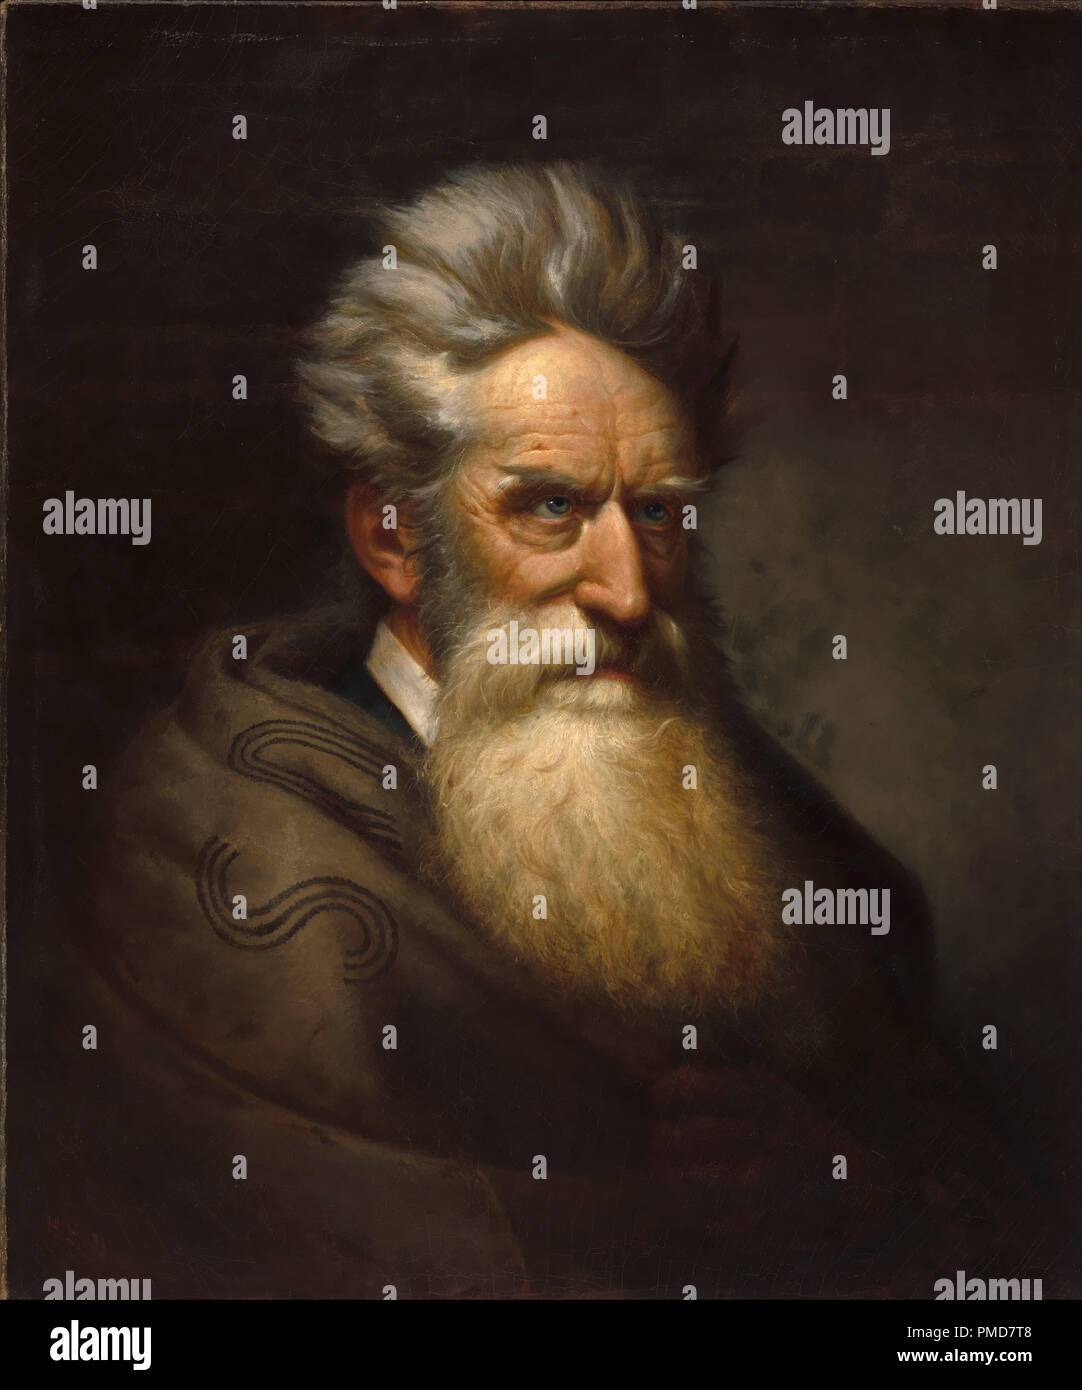 John Brown. Date/Period: 1872. Painting. Oil on canvas. Height: 765 mm (30.11 in); Width: 645 mm (25.39 in). Author: OLE PETER HANSEN BALLING. Stock Photo